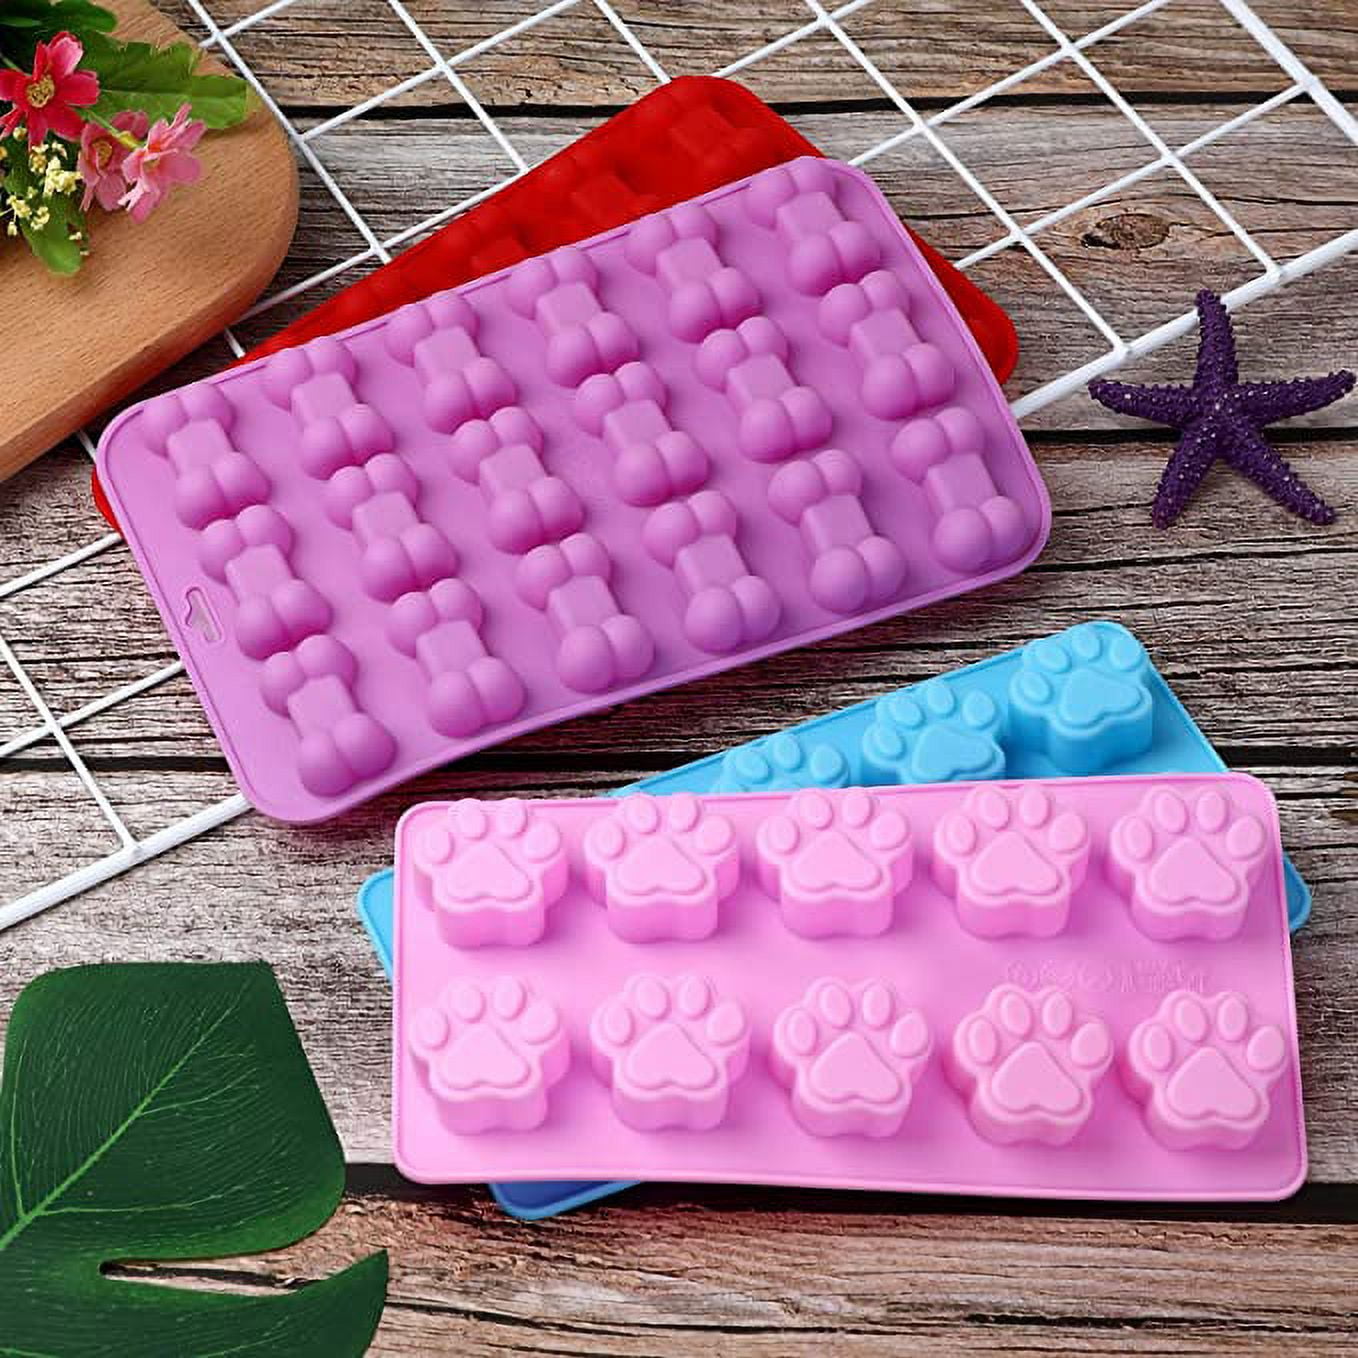 Slopehill 1pc Dog Treat Mold Silicone Dog Paw Silicone Molds Paw Print Mold Candy Mold Dog Treat Chocolate Mold for Homemade Dog Treats,Soap,Candy., Adult